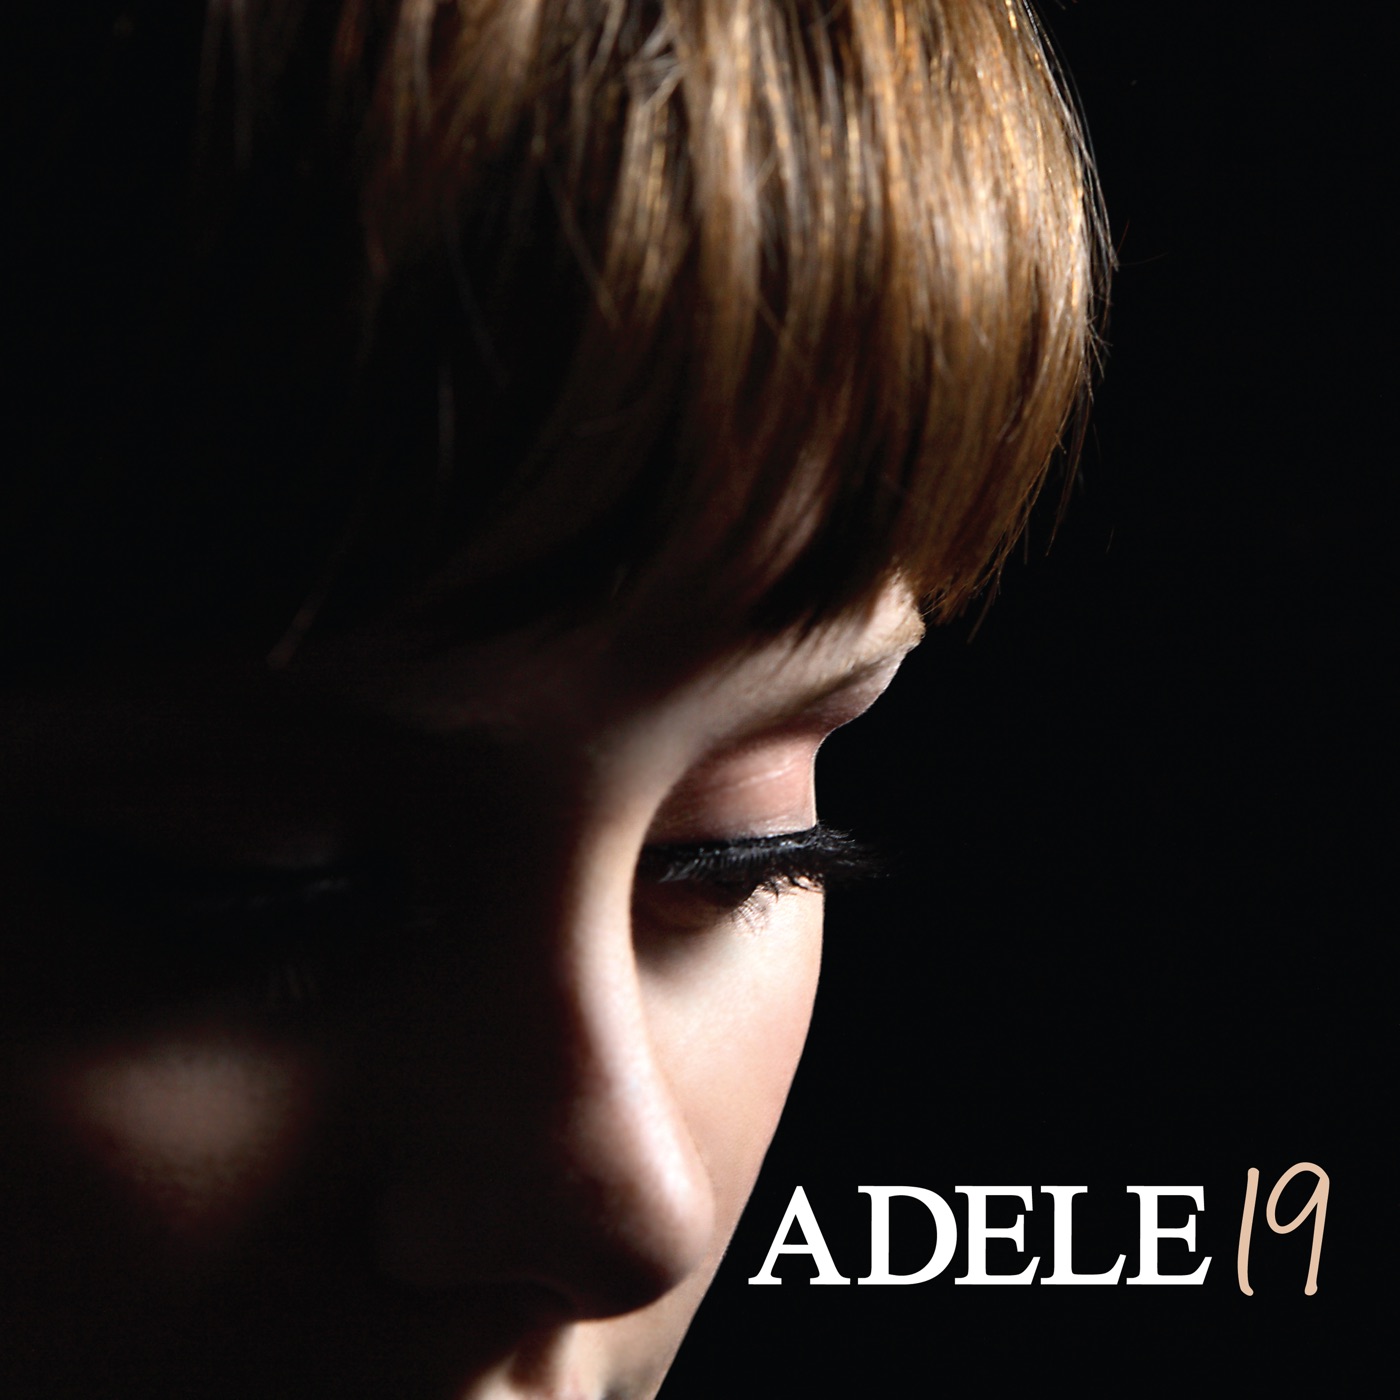 19 by Adele